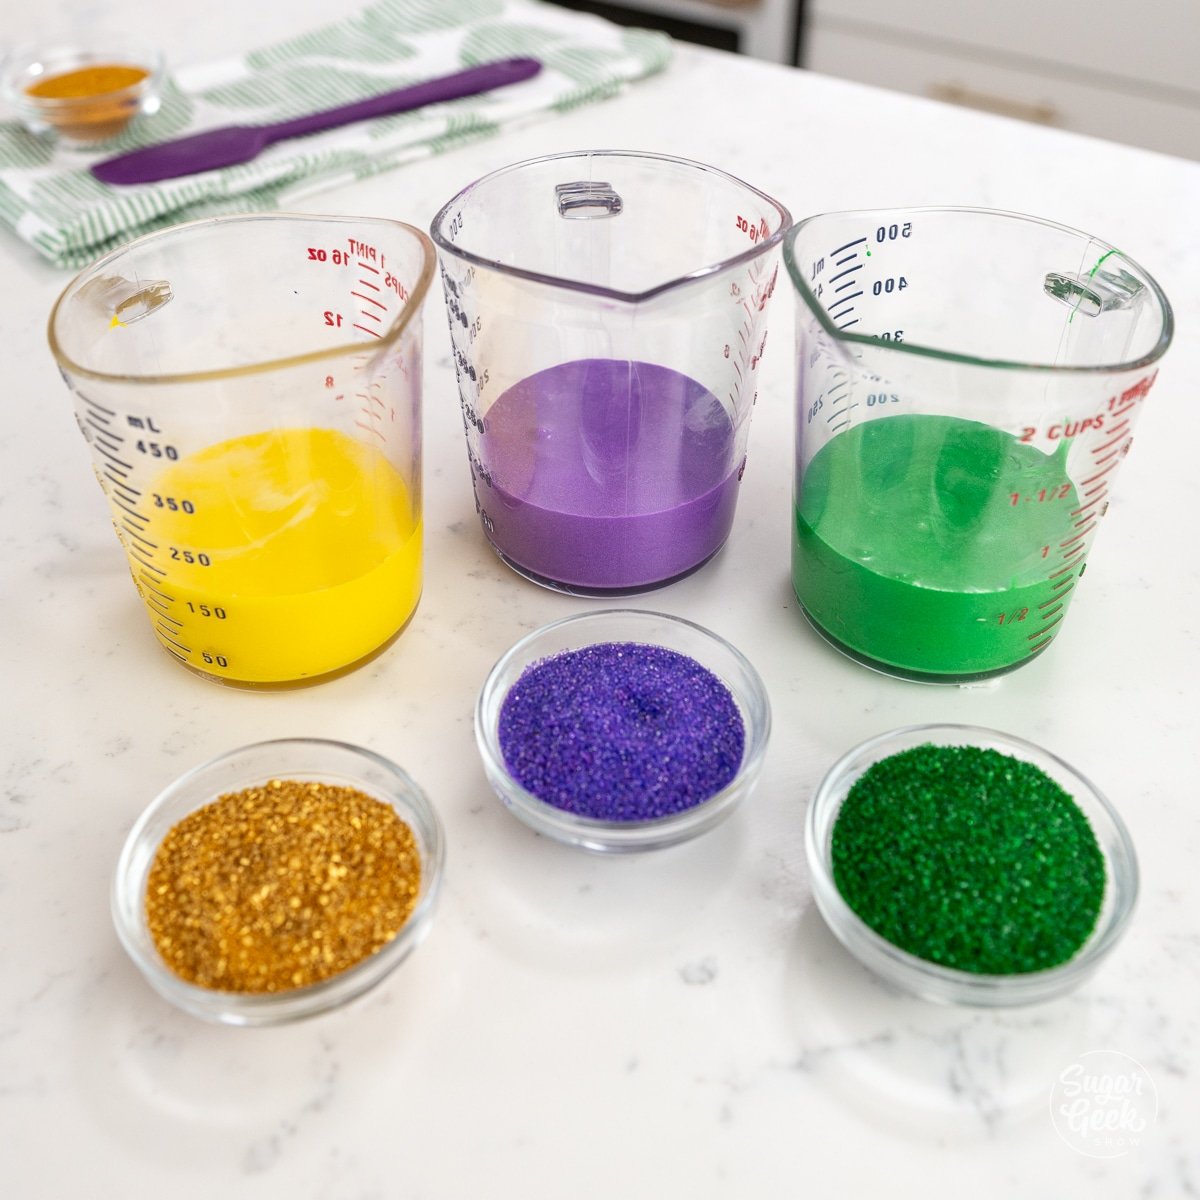 containers of gold, purple, and green glaze and sprinkles